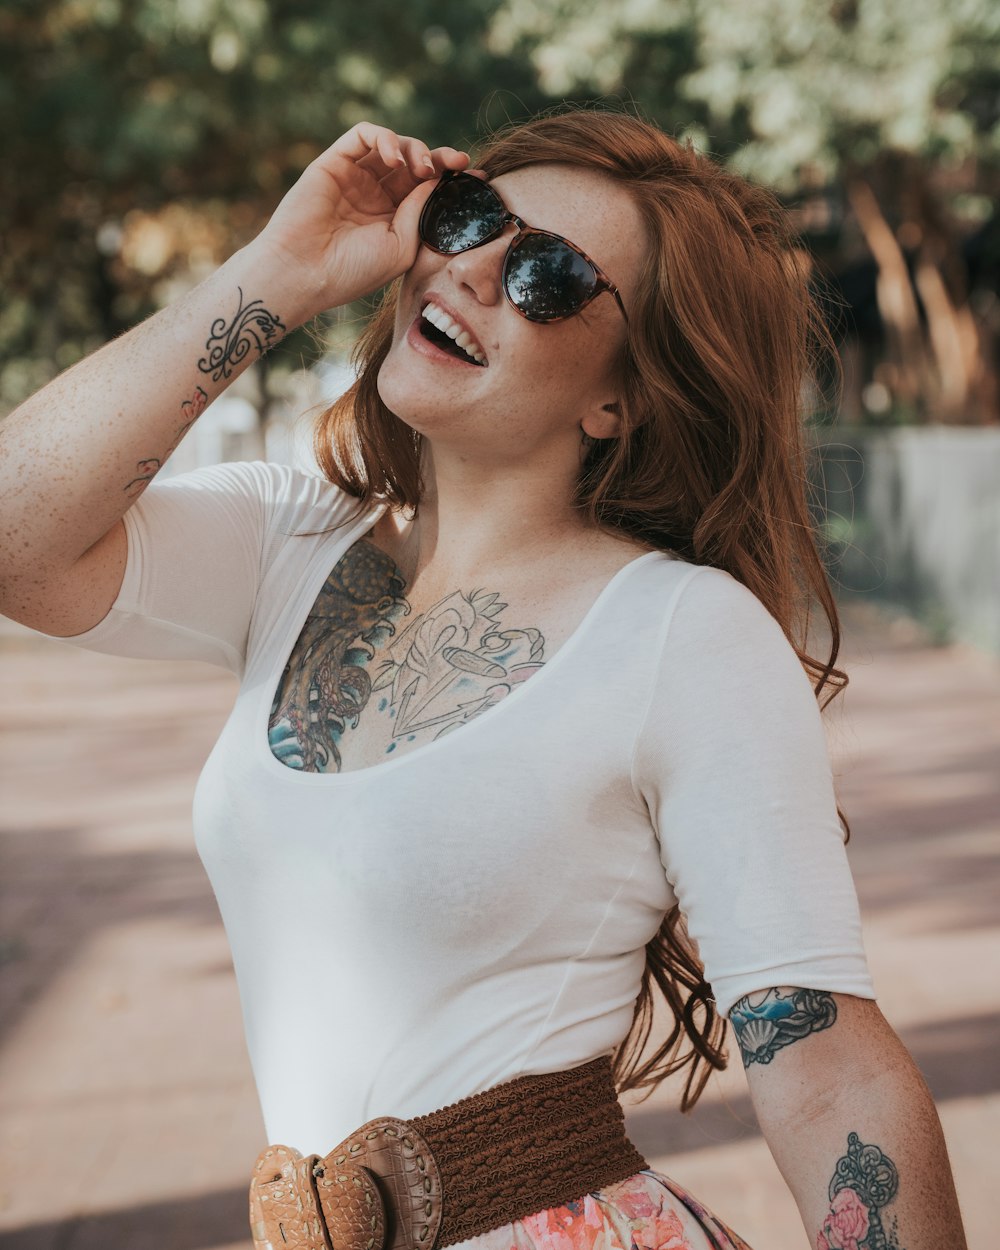 woman touching her sunglasses during daytime